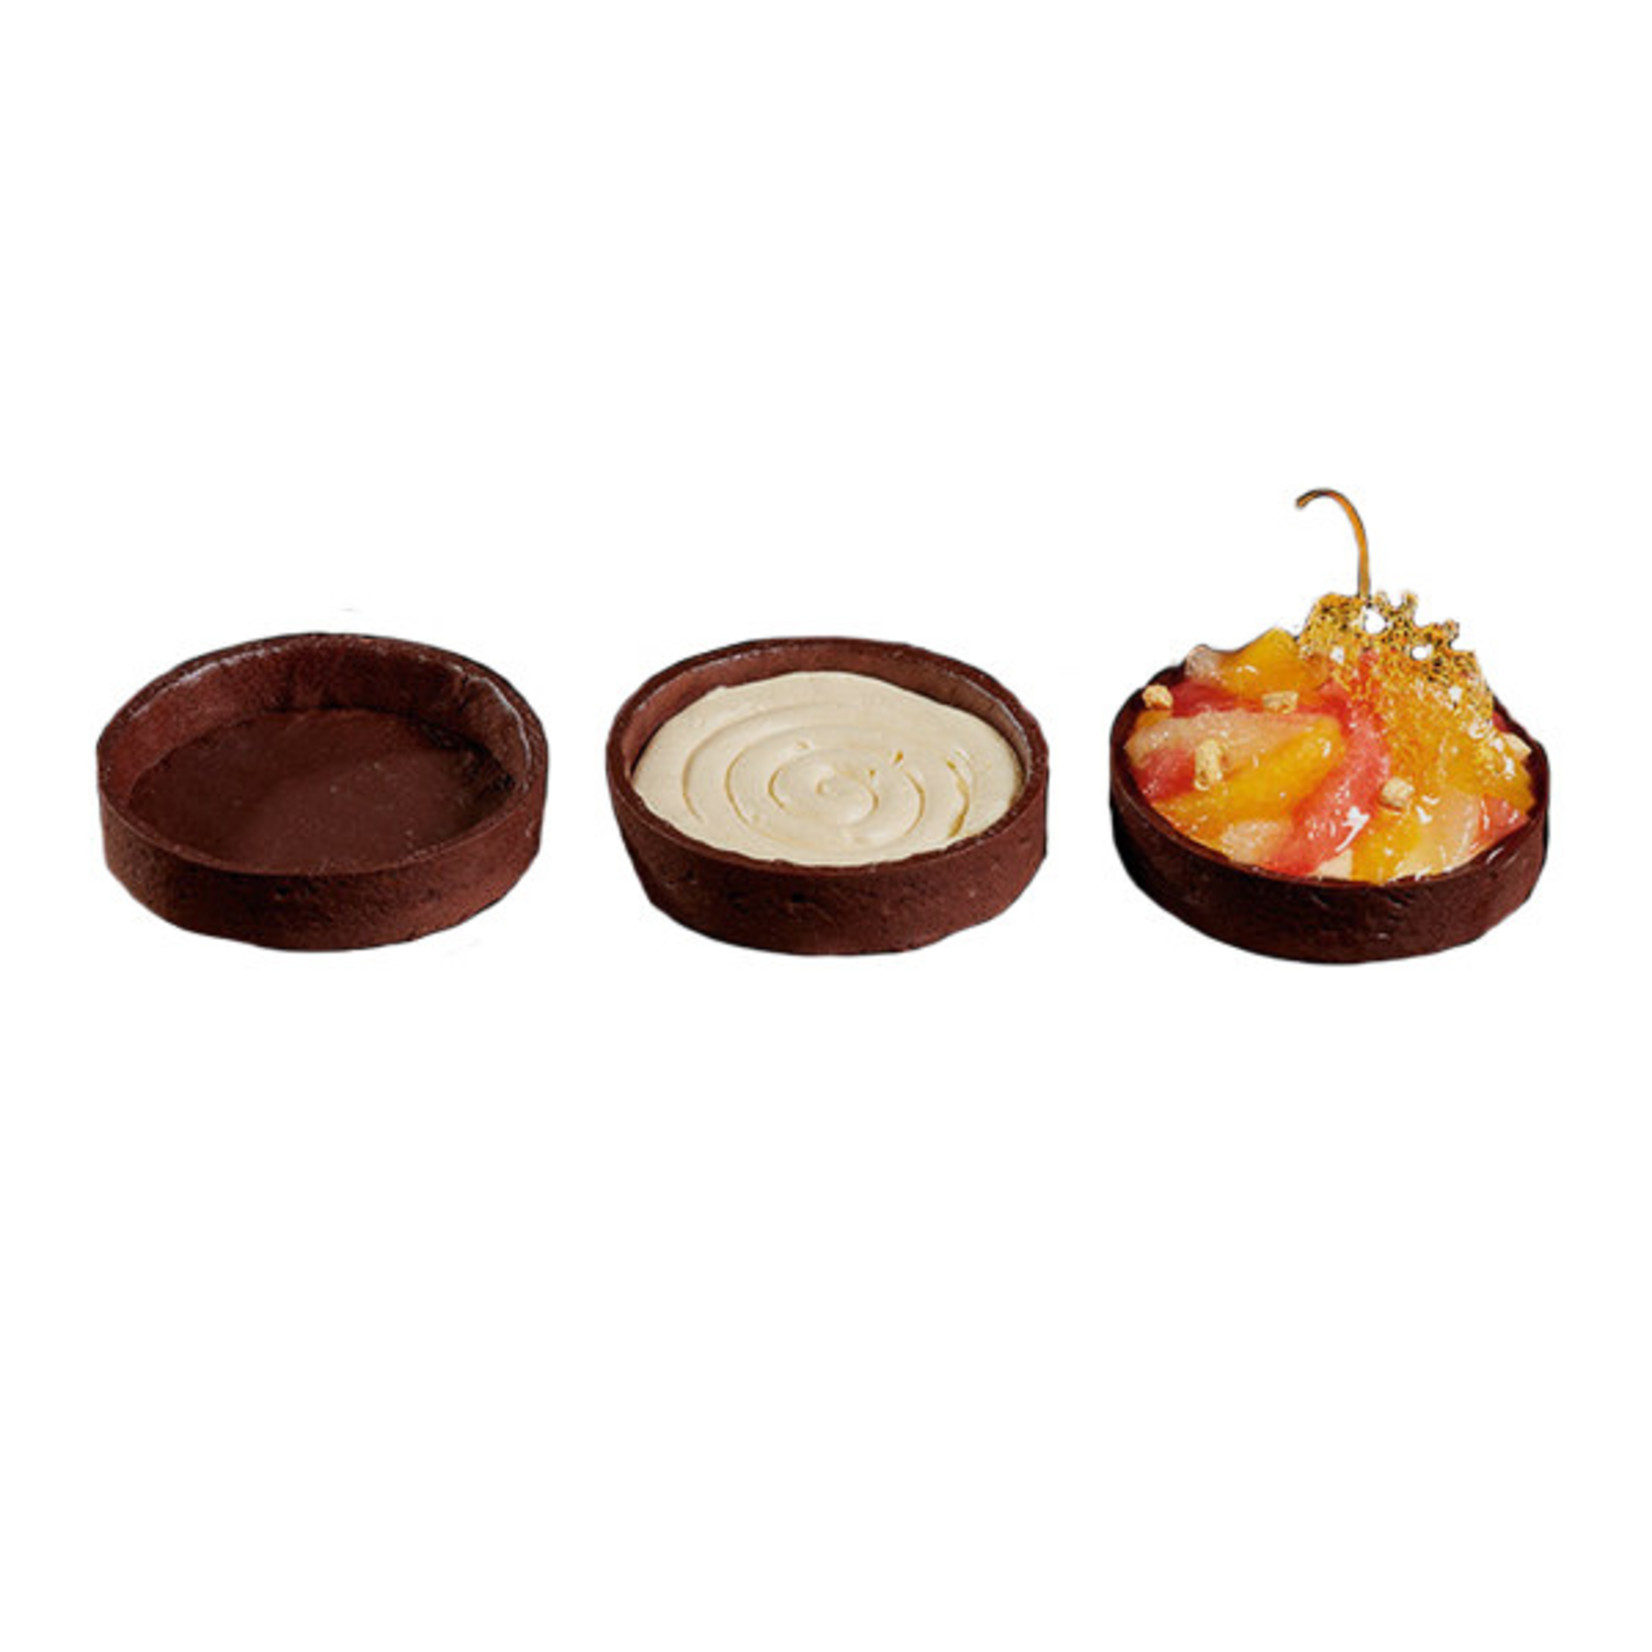 Le Chic Patissier Le Chic Patissier - Chocolate Round Tart shell - 3" (60 ct)